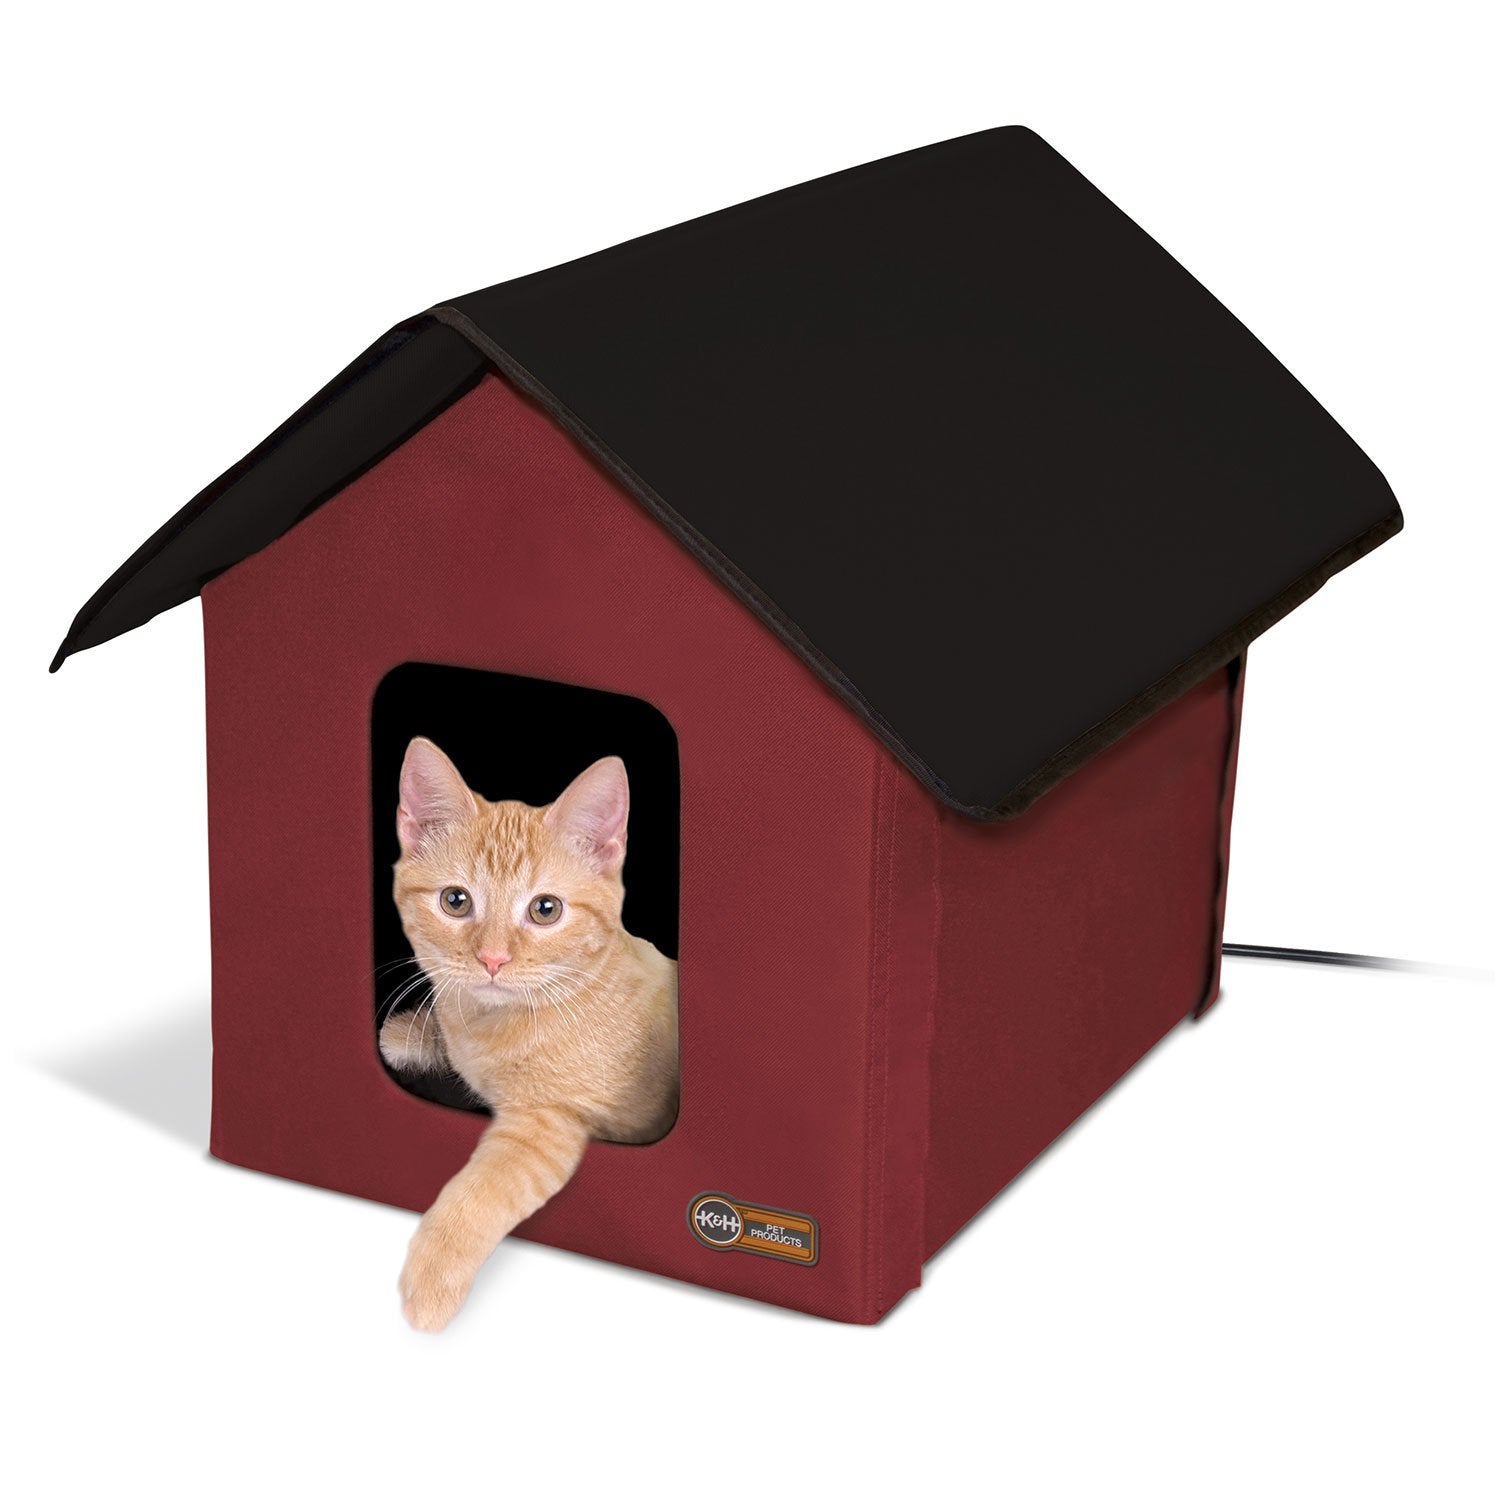 K&h Pet Products Kh3994 Outdoor Heated Kitty House Barn